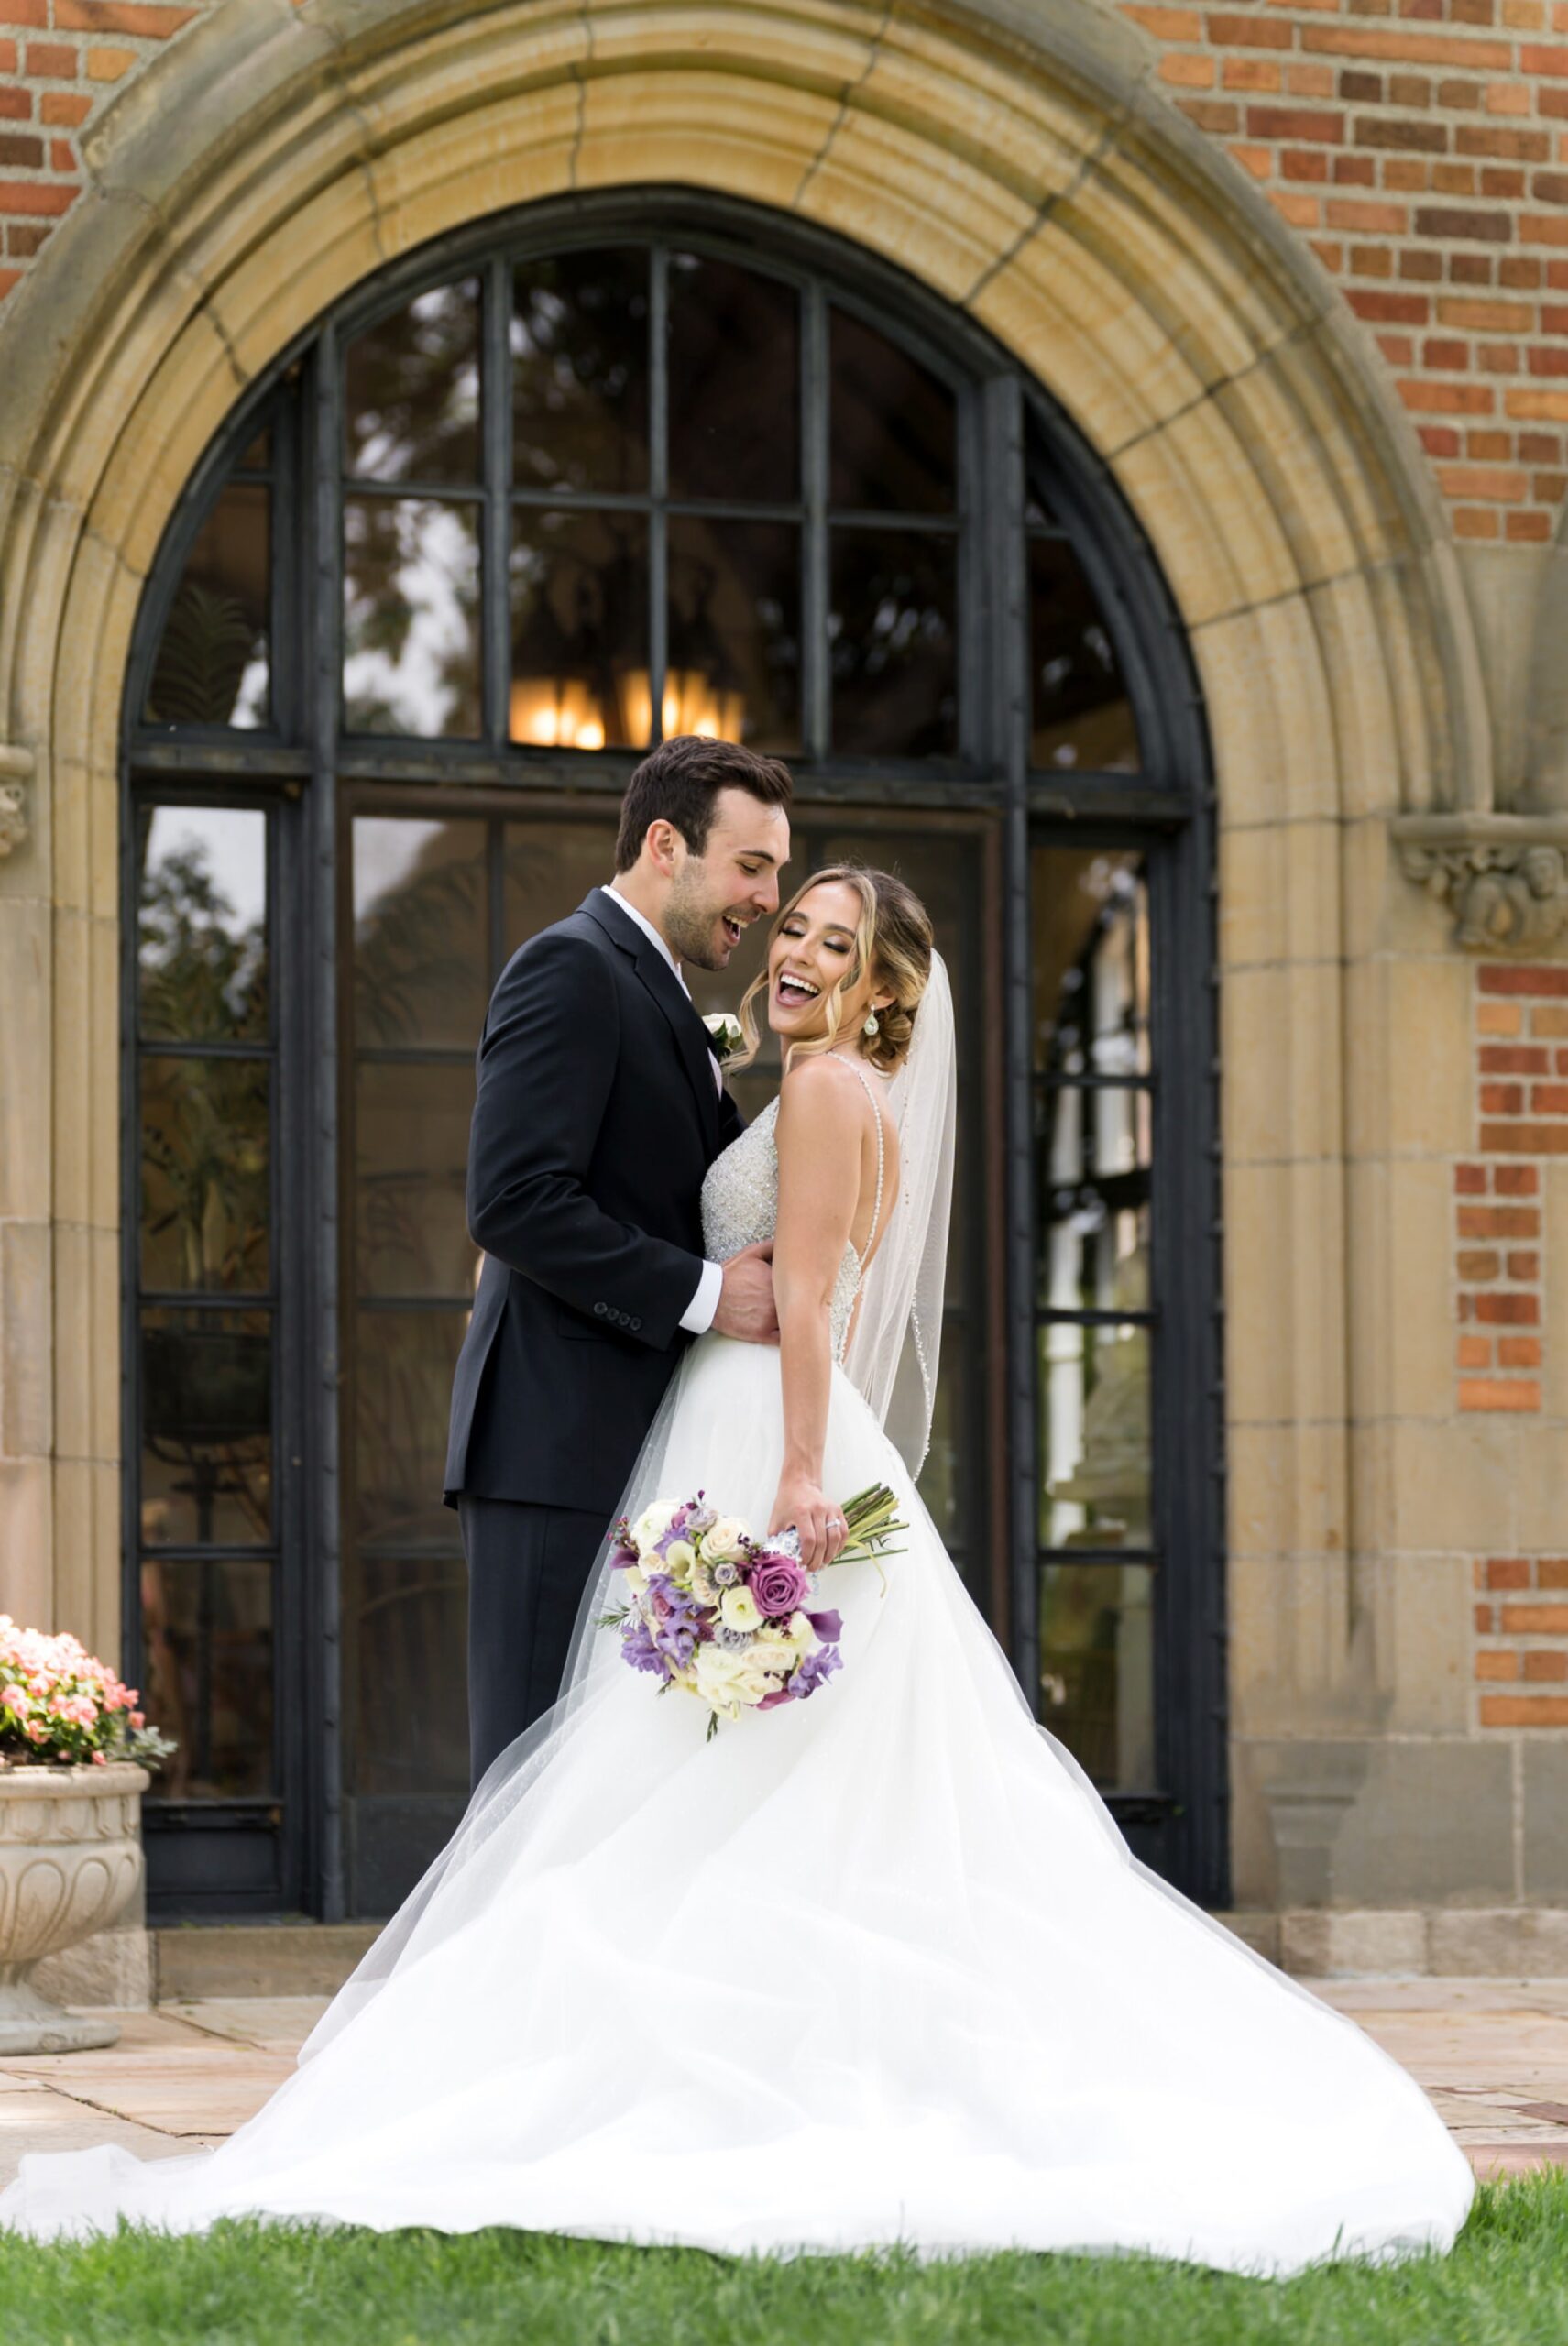 A couple embrace and laugh in front of an arch of windows at their wedding at Meadowbrook Hall.  